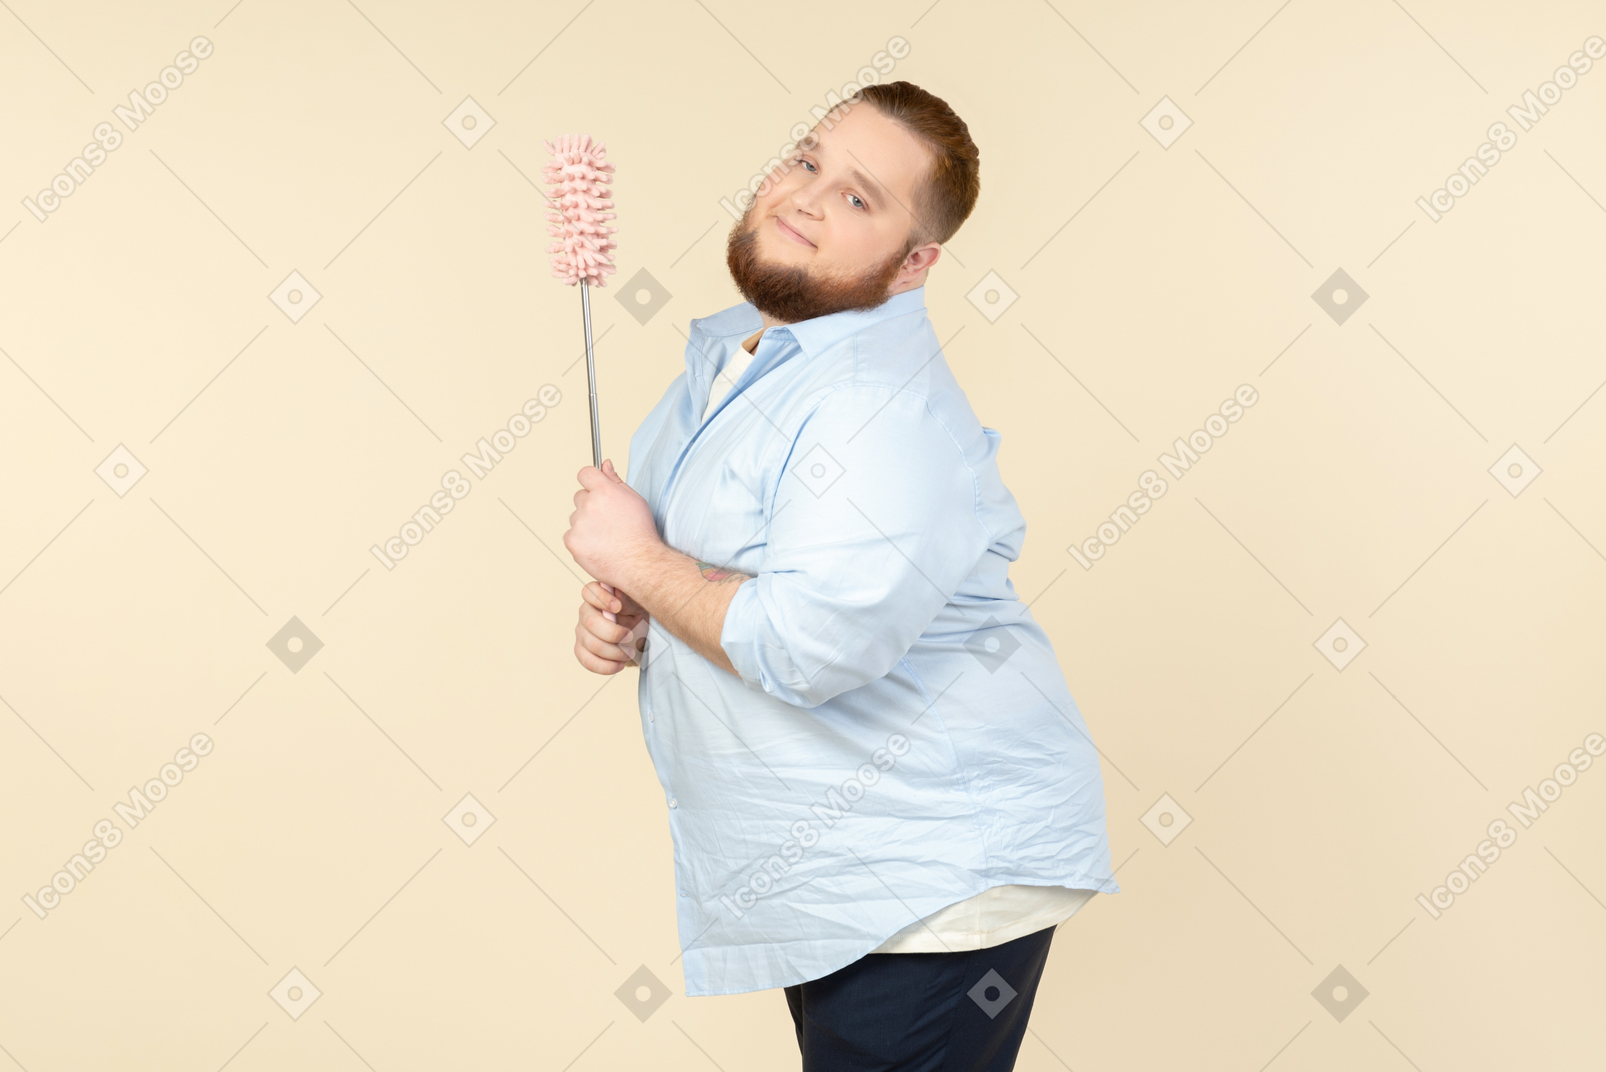 Cacthy looking young overweight househusband holding pipe-cleaner